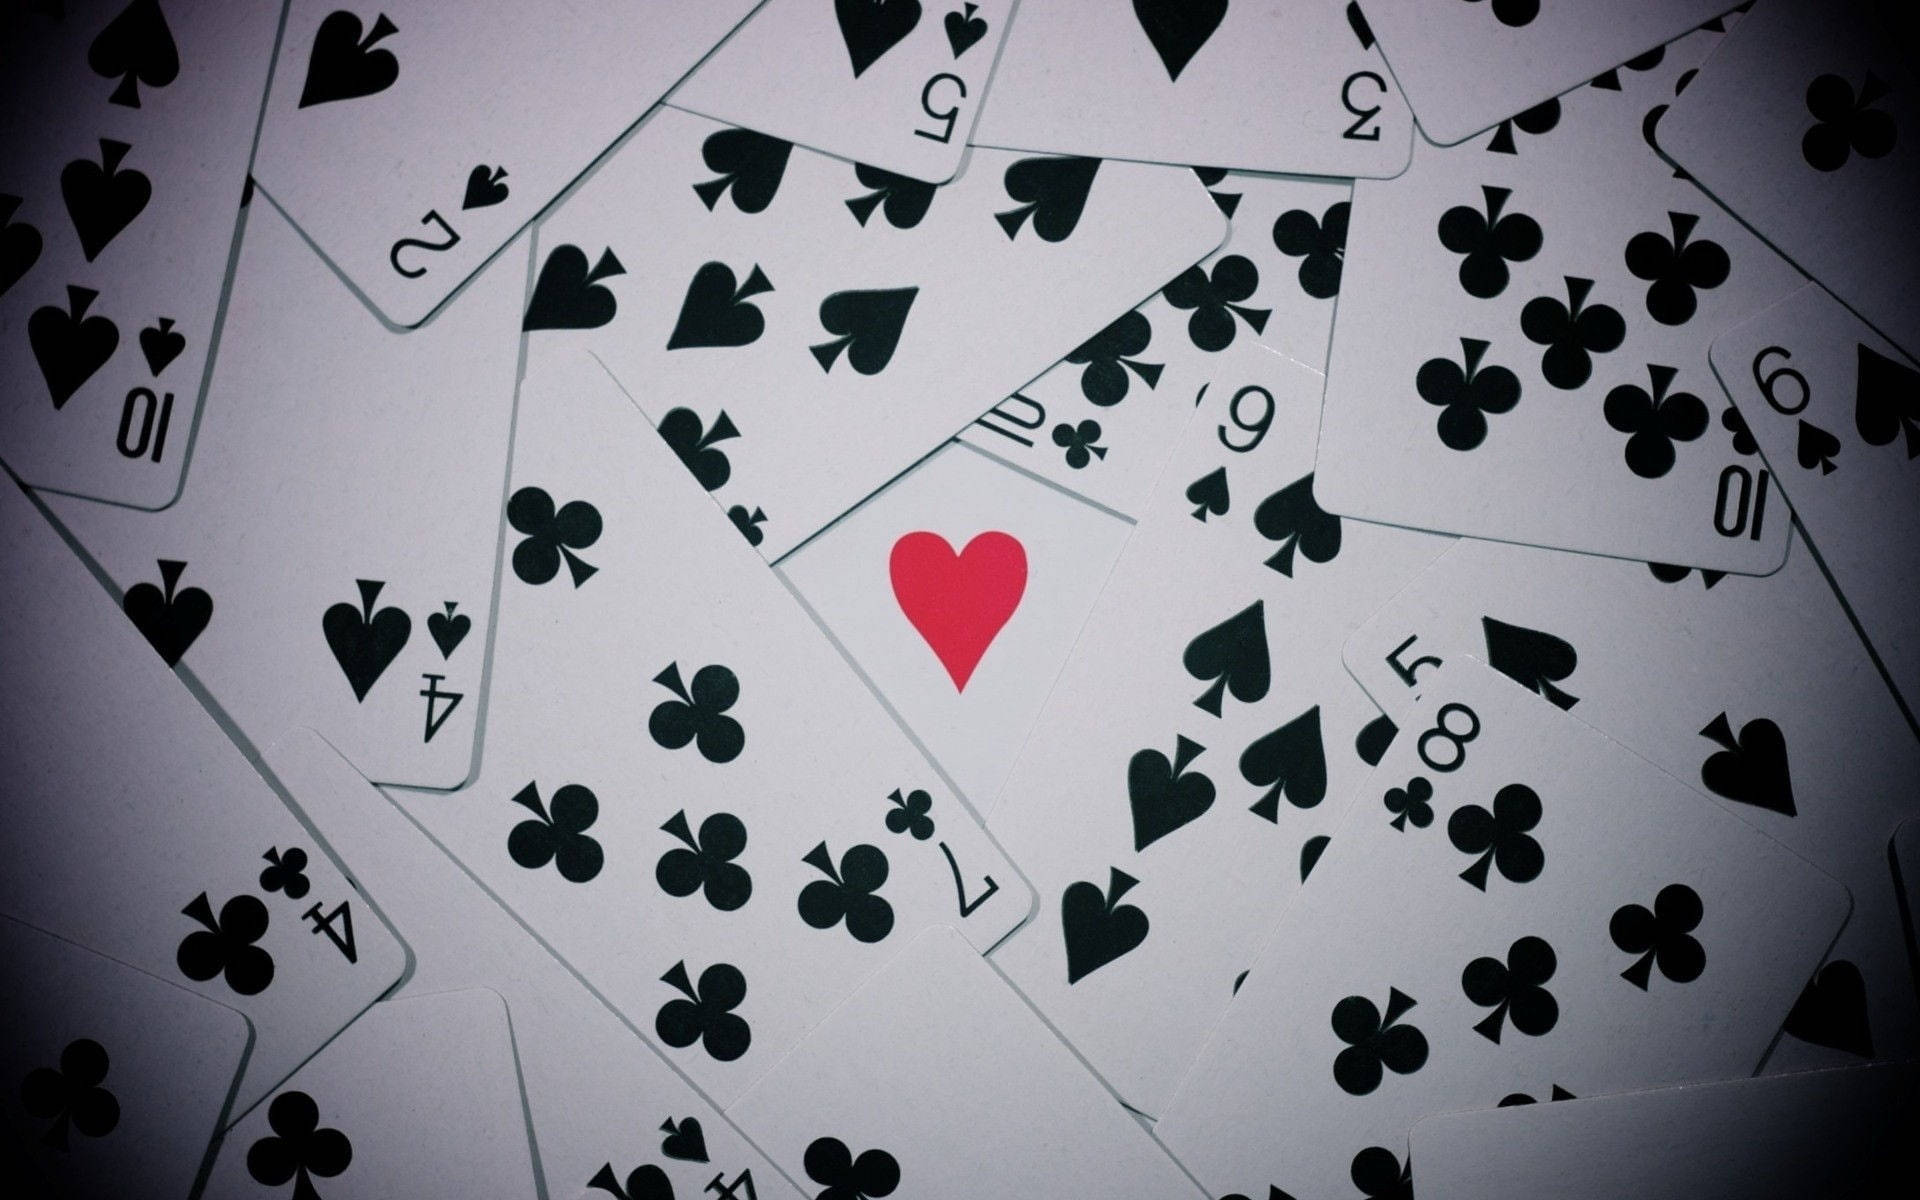 Jumbled Heart Playing Cards